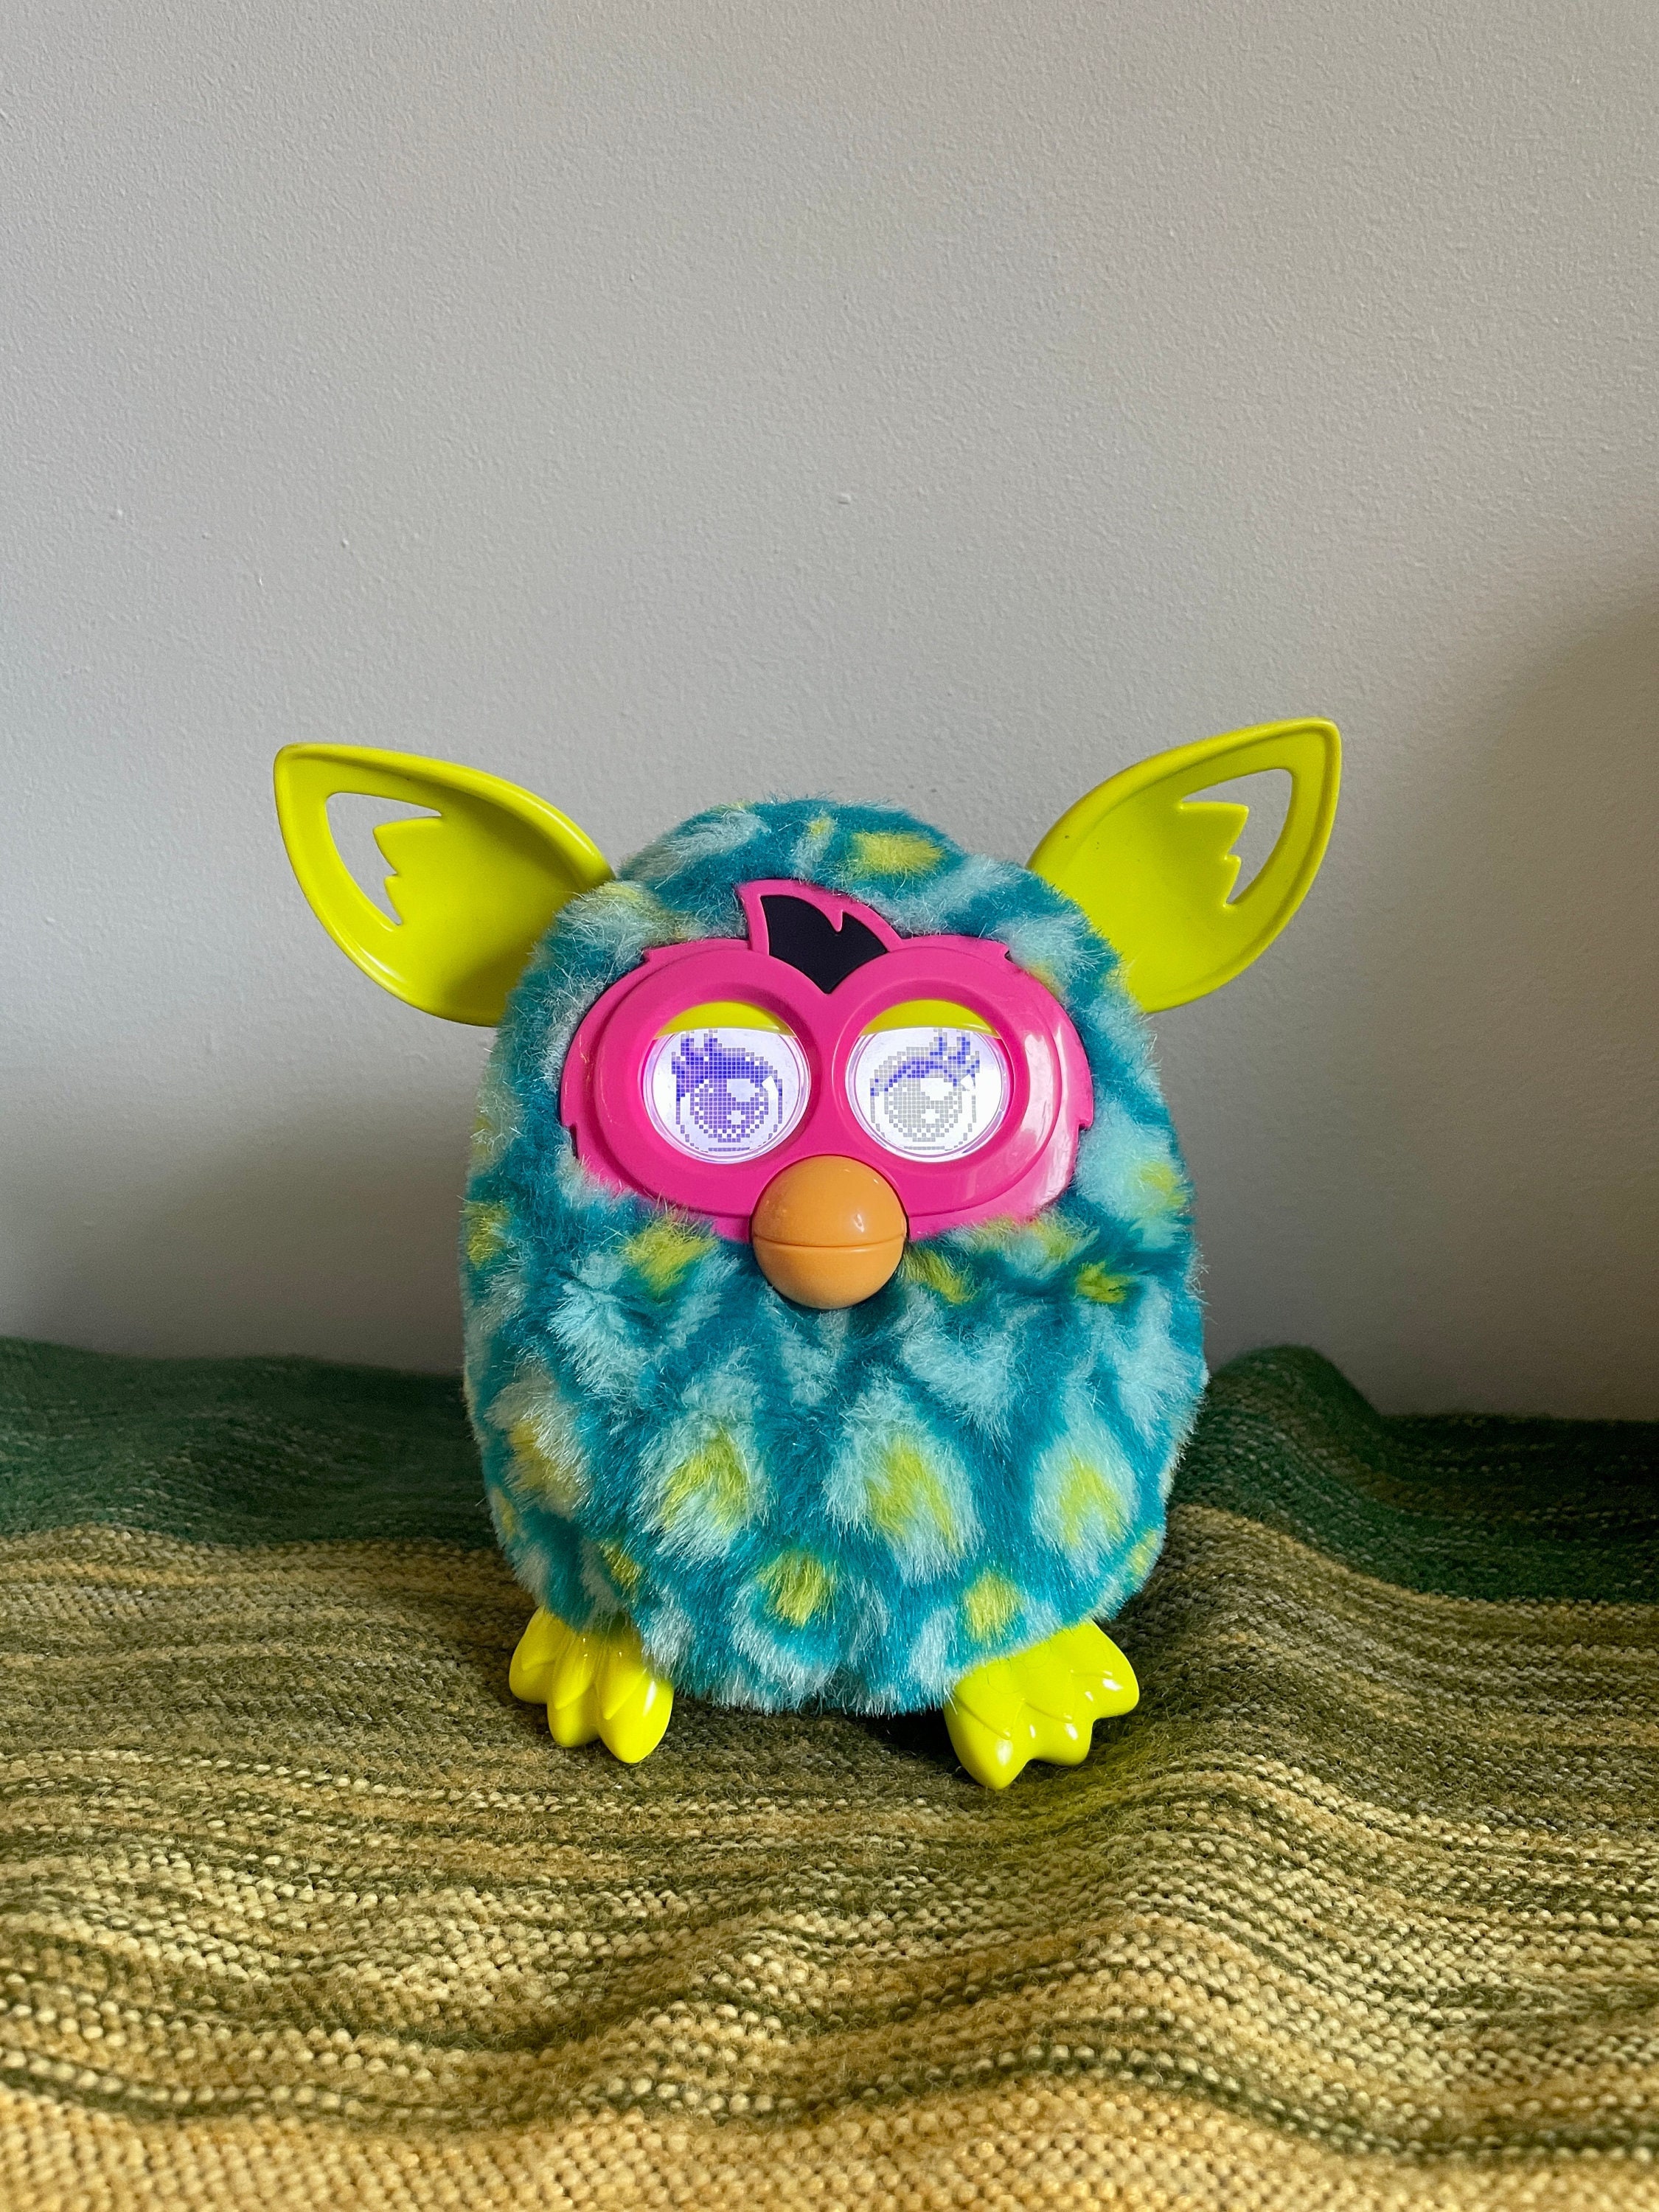 Furby Boom Peacock Turquoise Interactive Toy 2012 Hasbro. Works